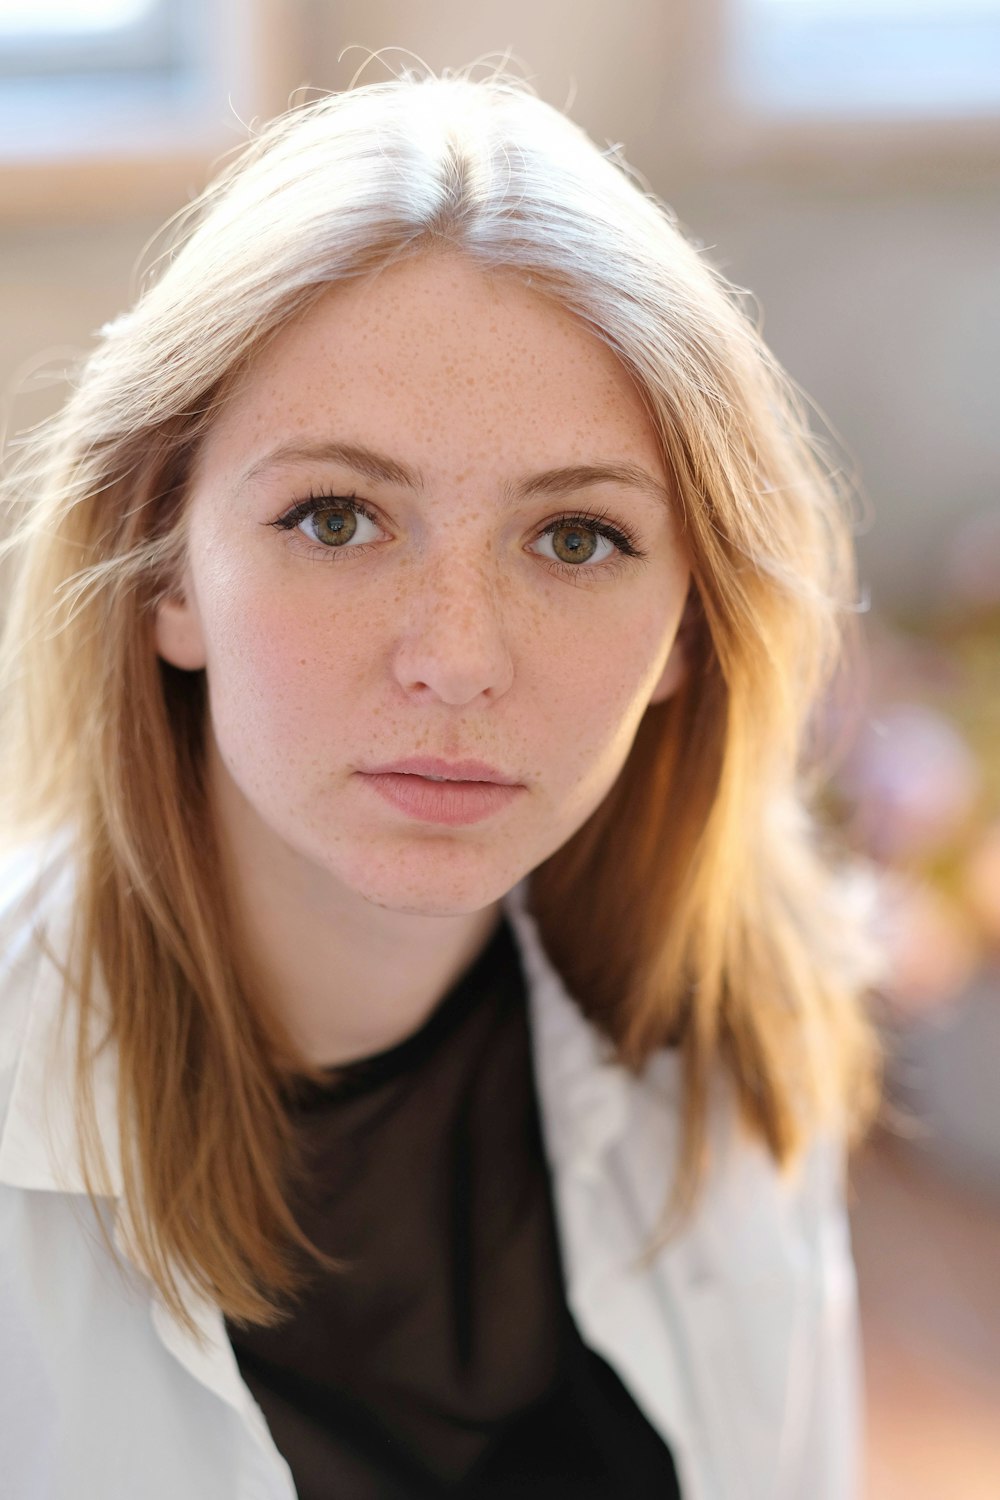 a close up of a person wearing a white jacket